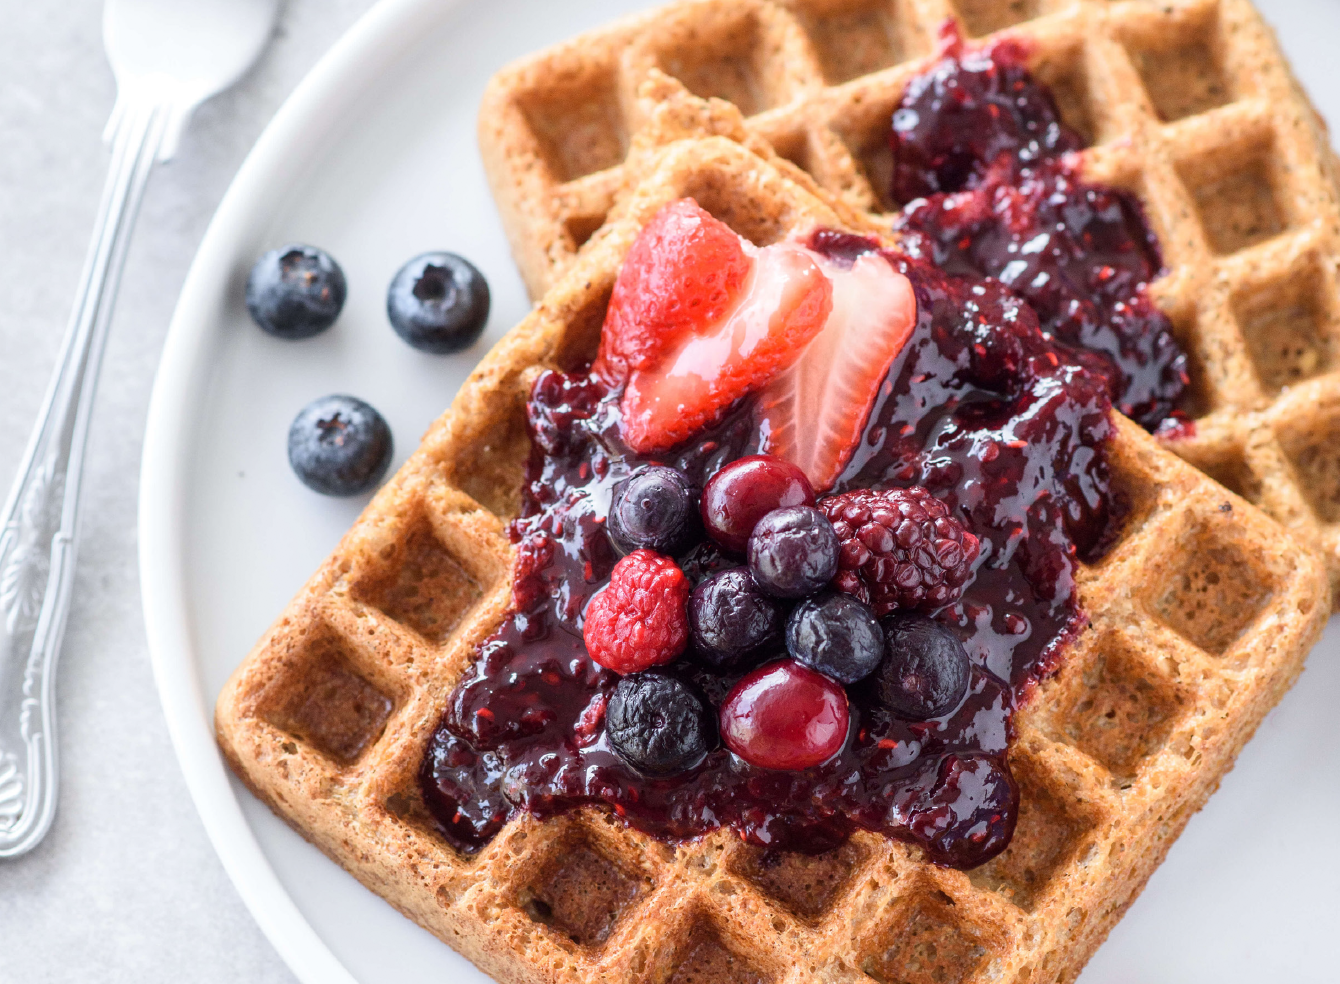 Fat Loss Meal Plan image of waffles and berries